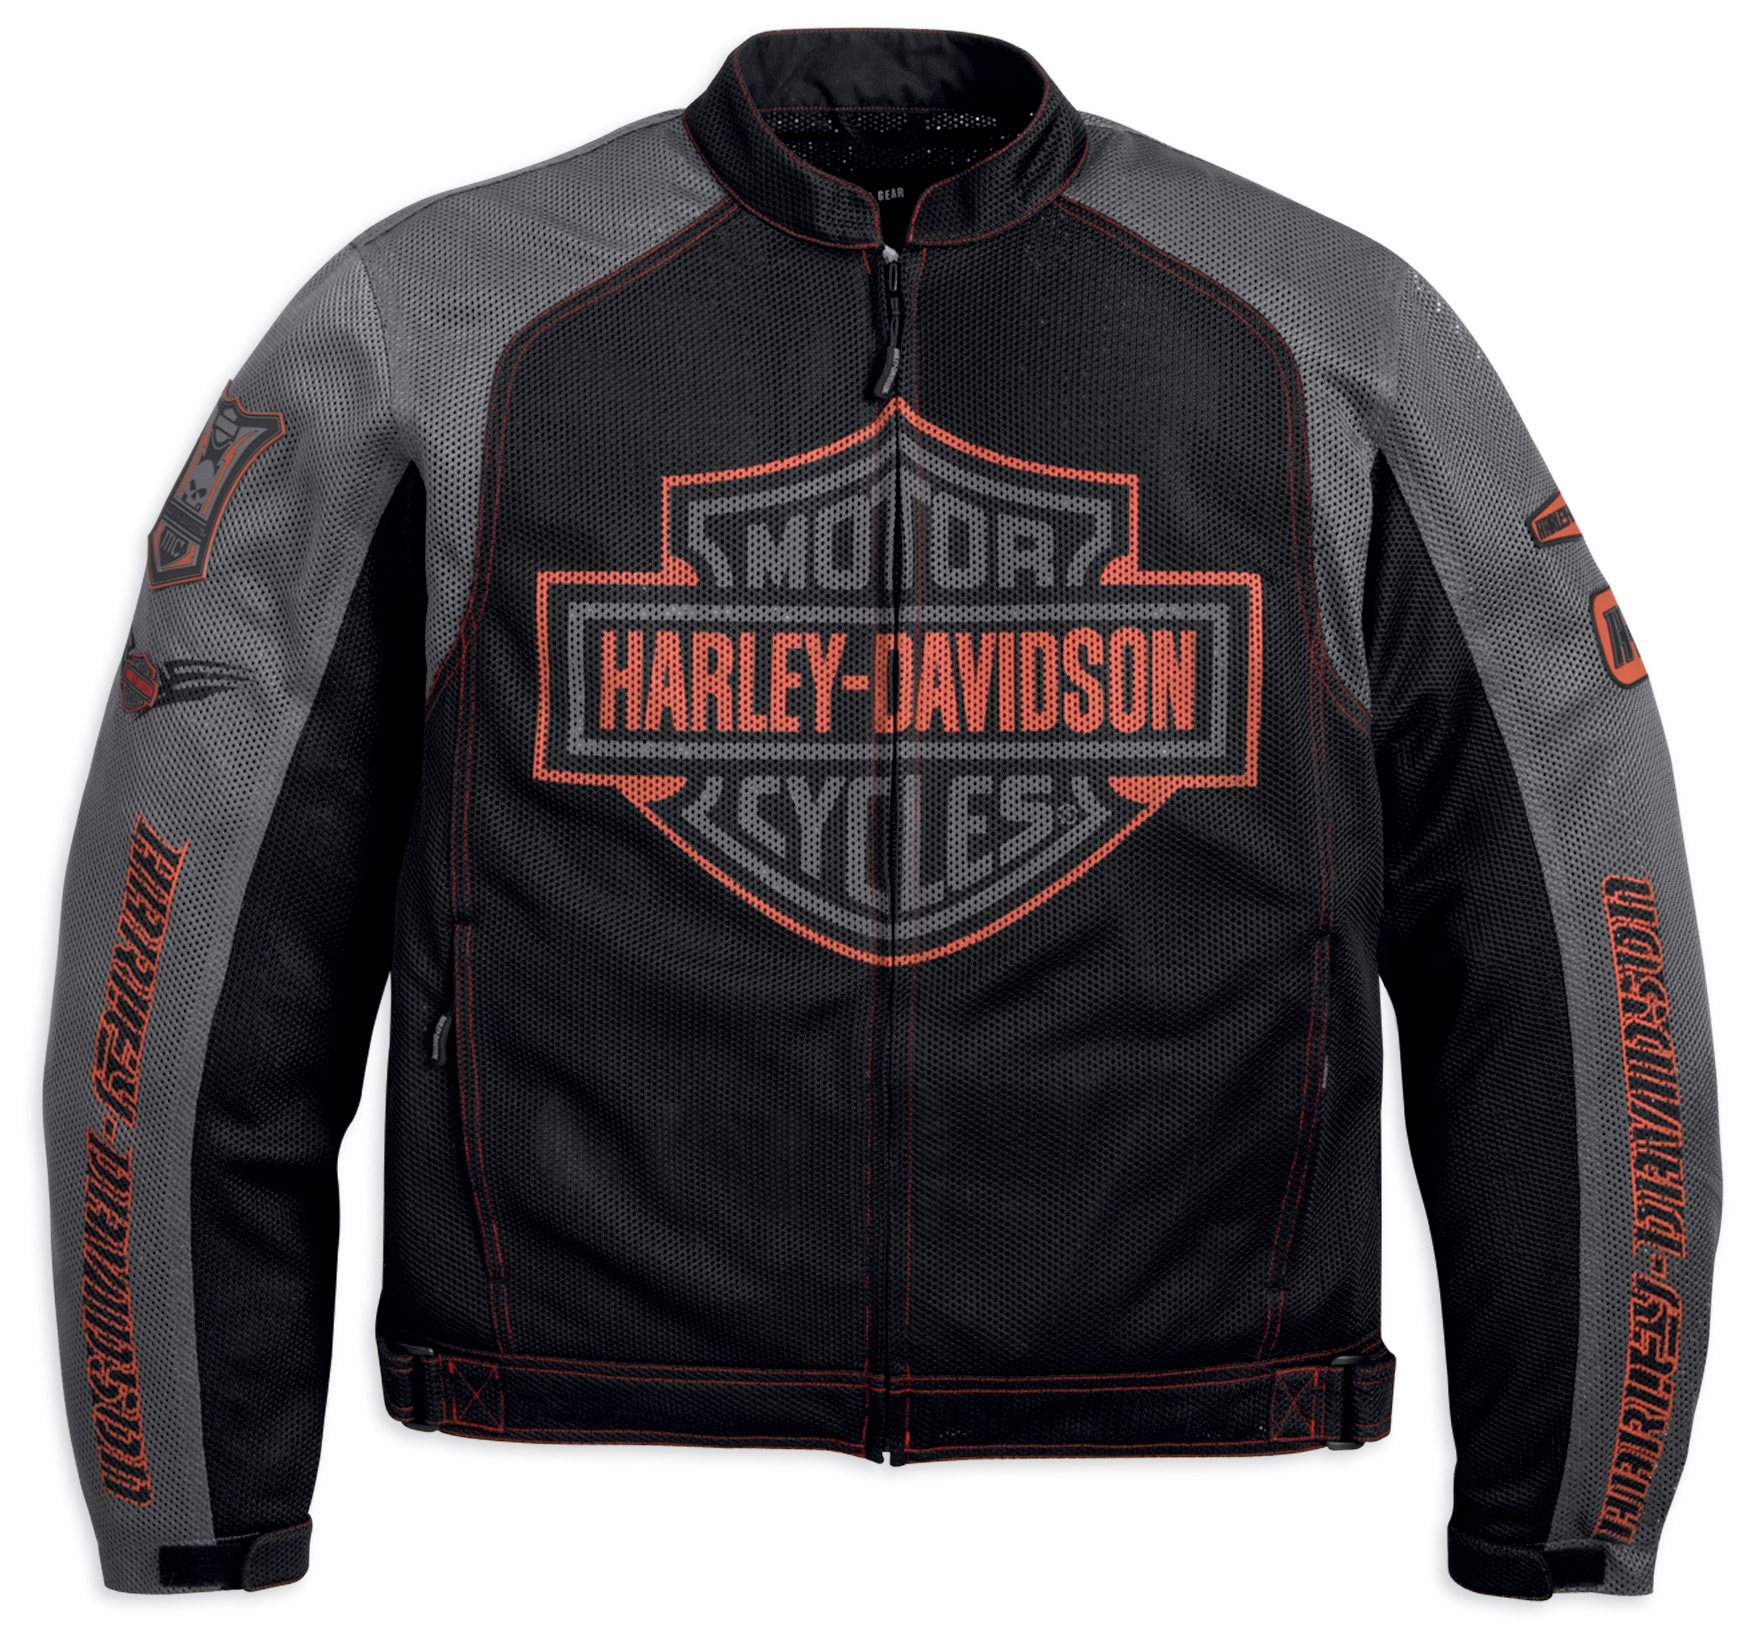 CONTENTION MESH JACKET FROM HARLEY-DAVIDSON | Born To Ride Motorcycle ...